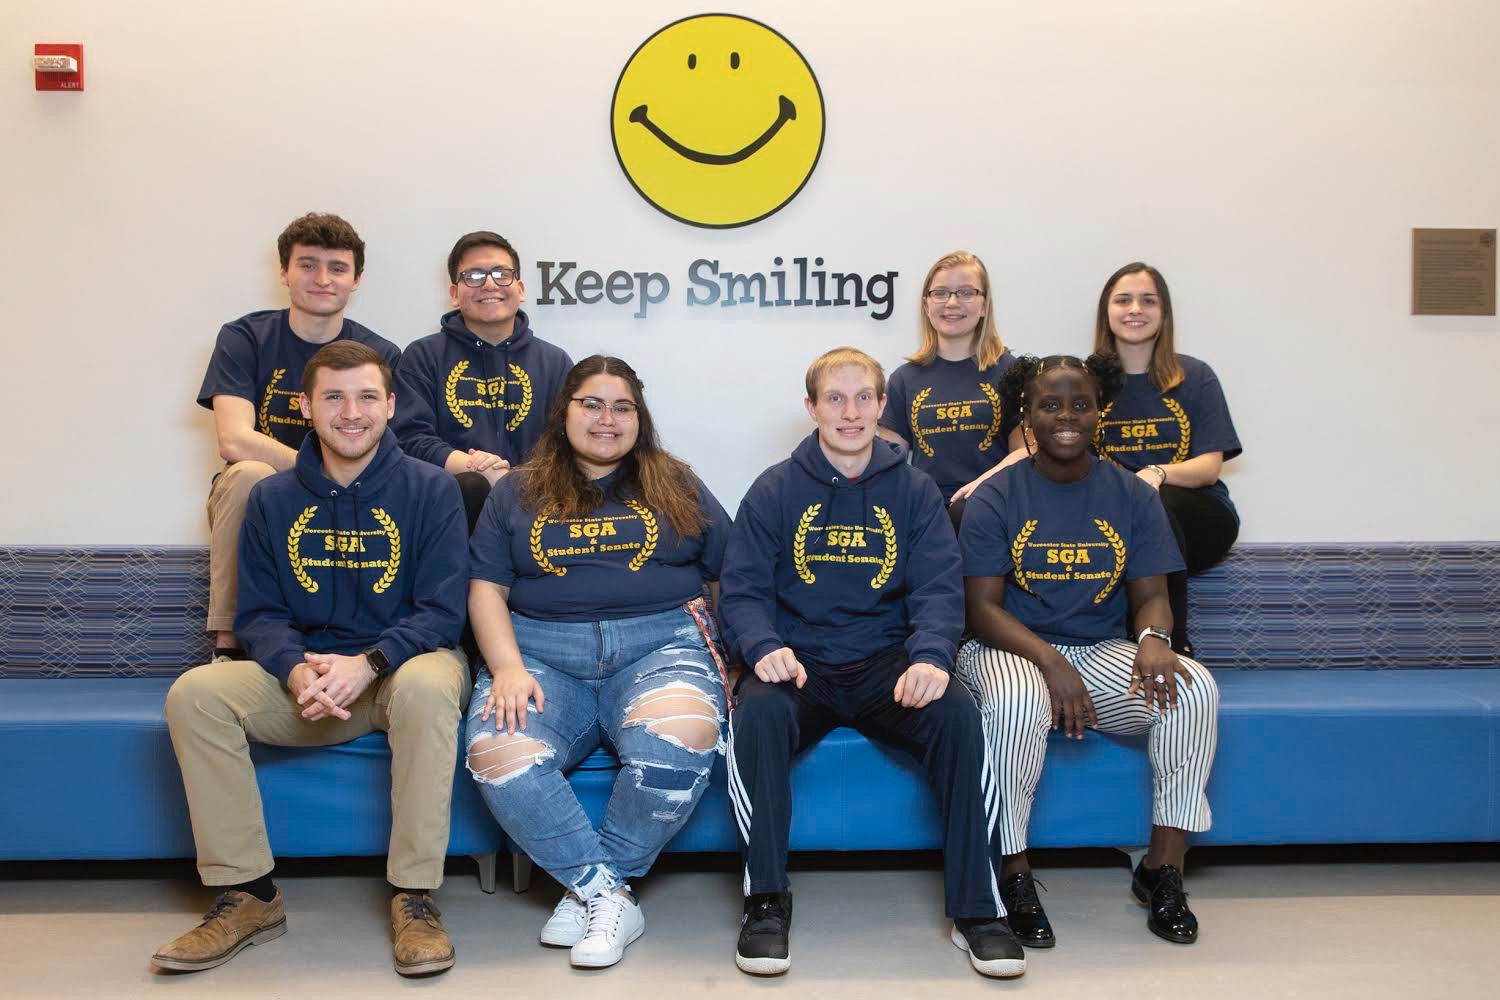 A group of students wearing SGA sweaters smiling at the camera